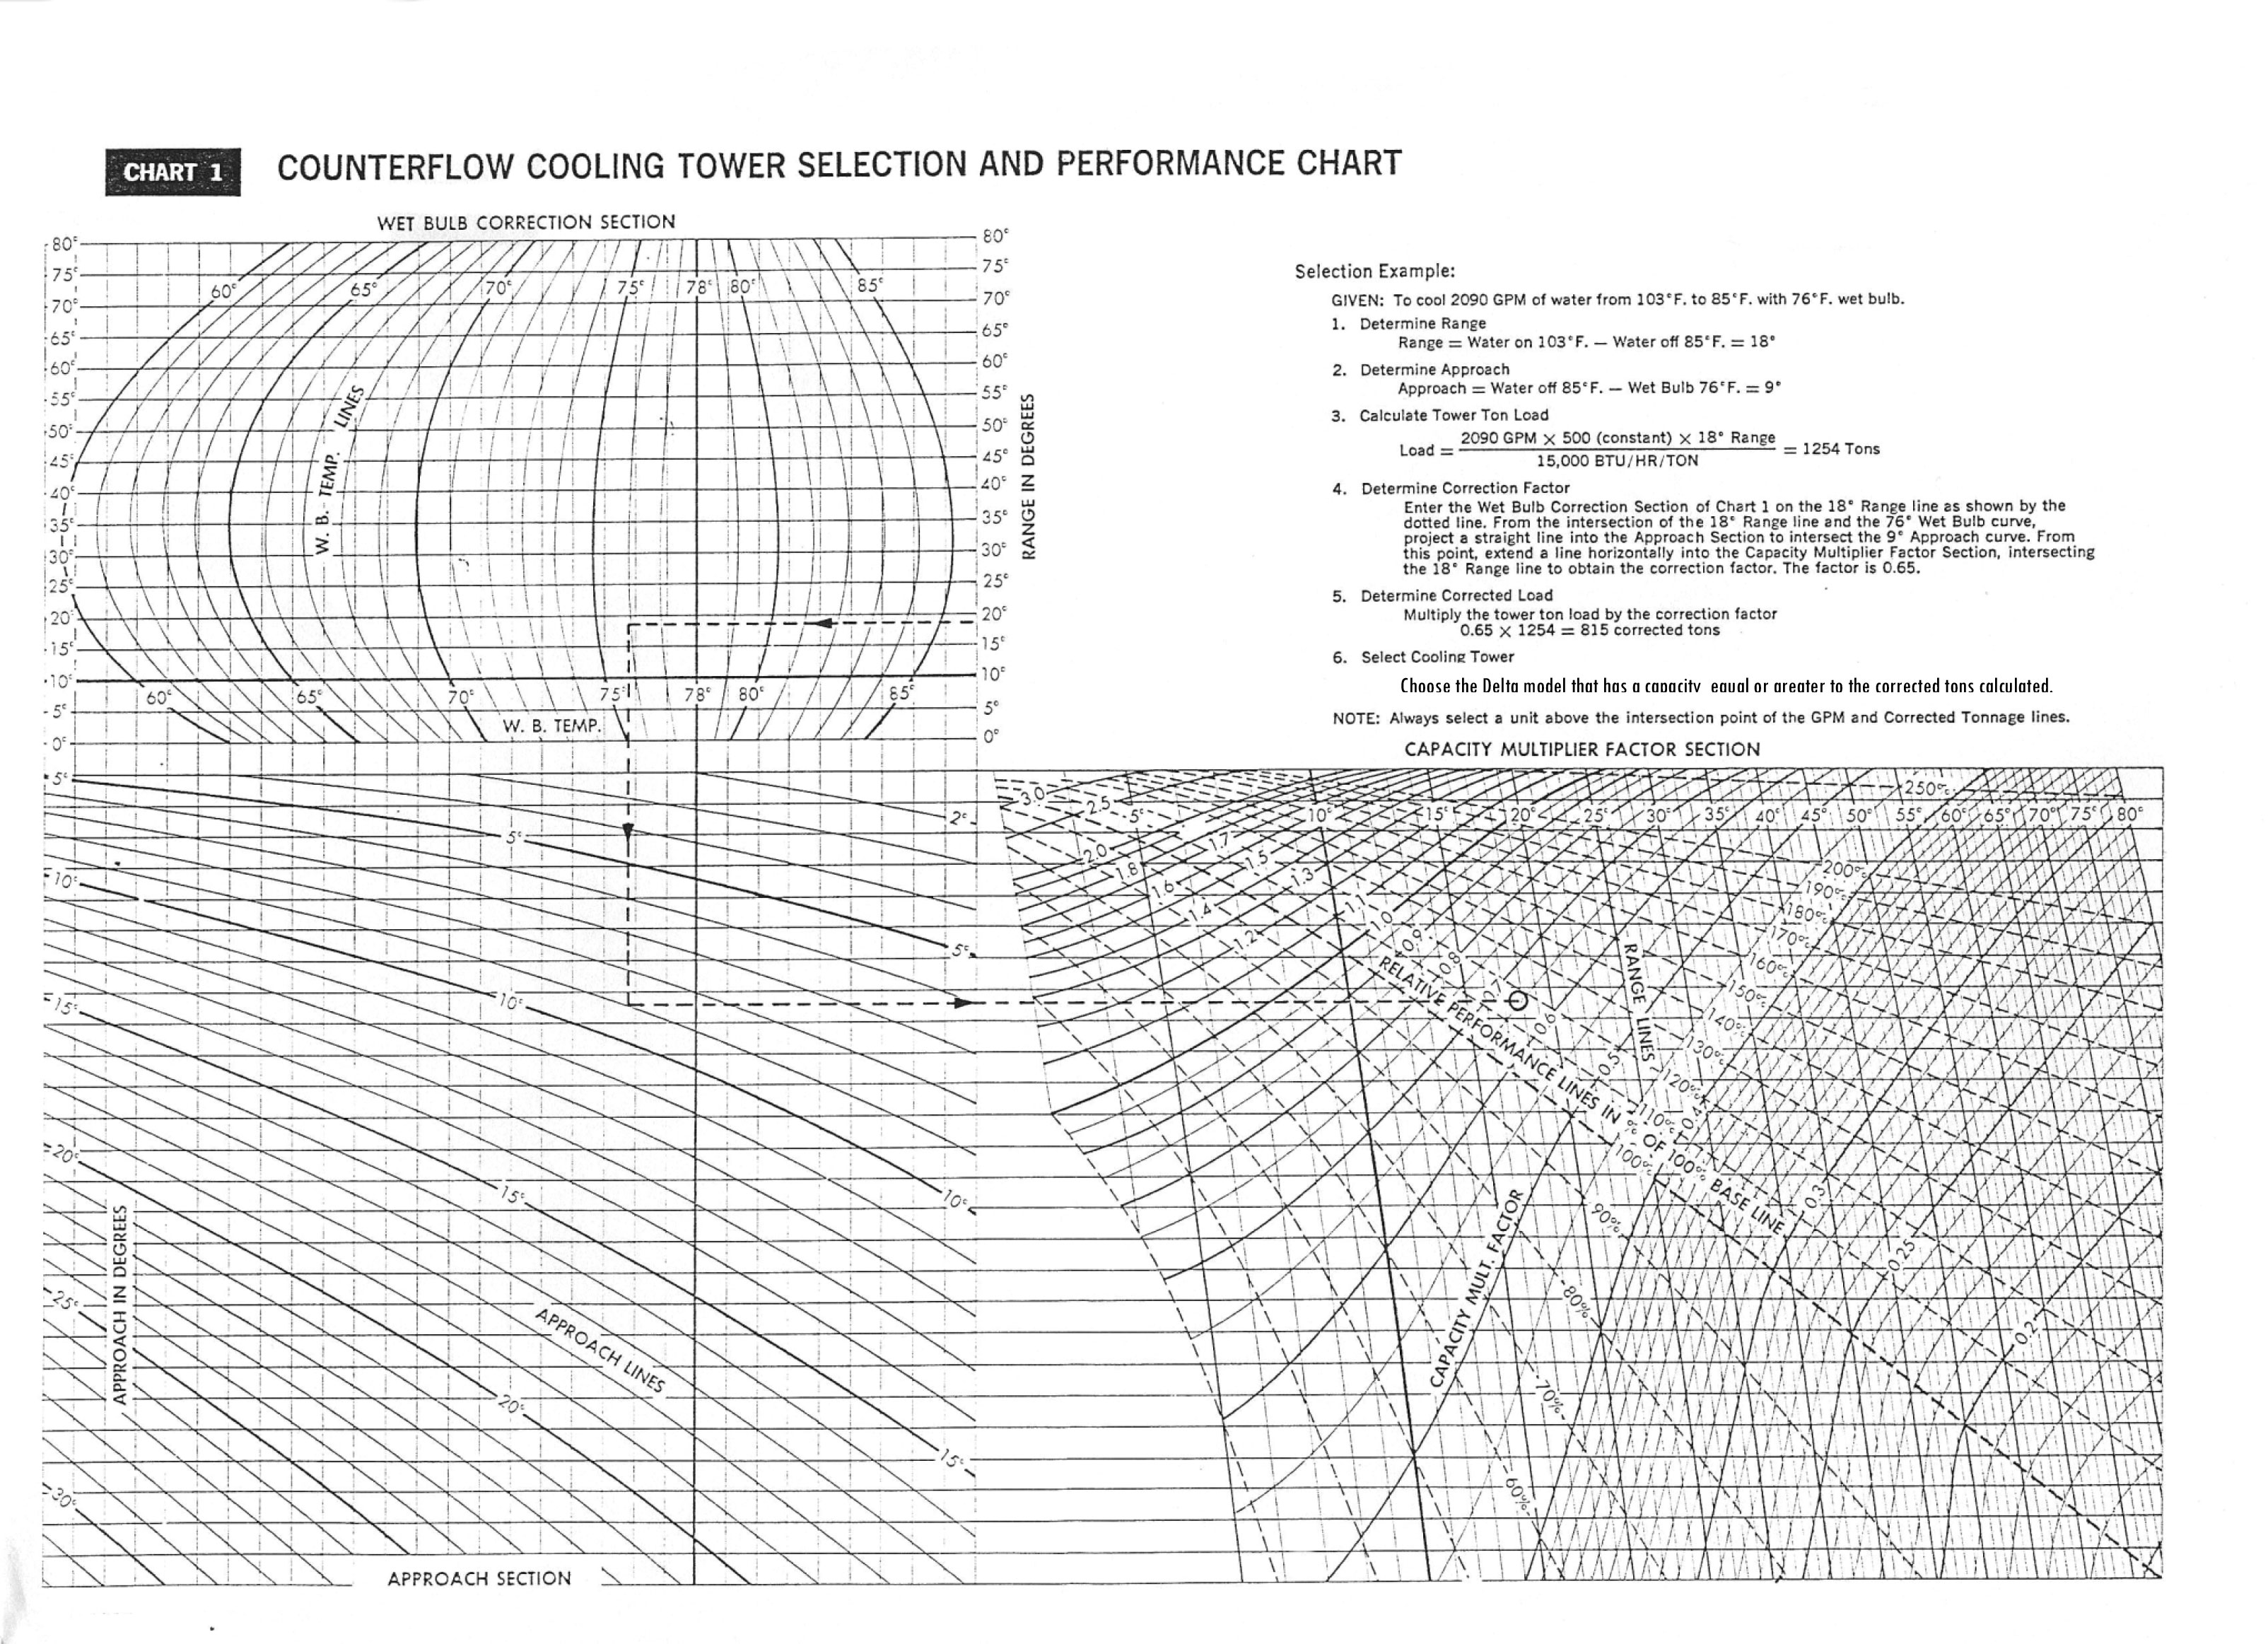 counterflow cooling towers design, selection, and performance chart 